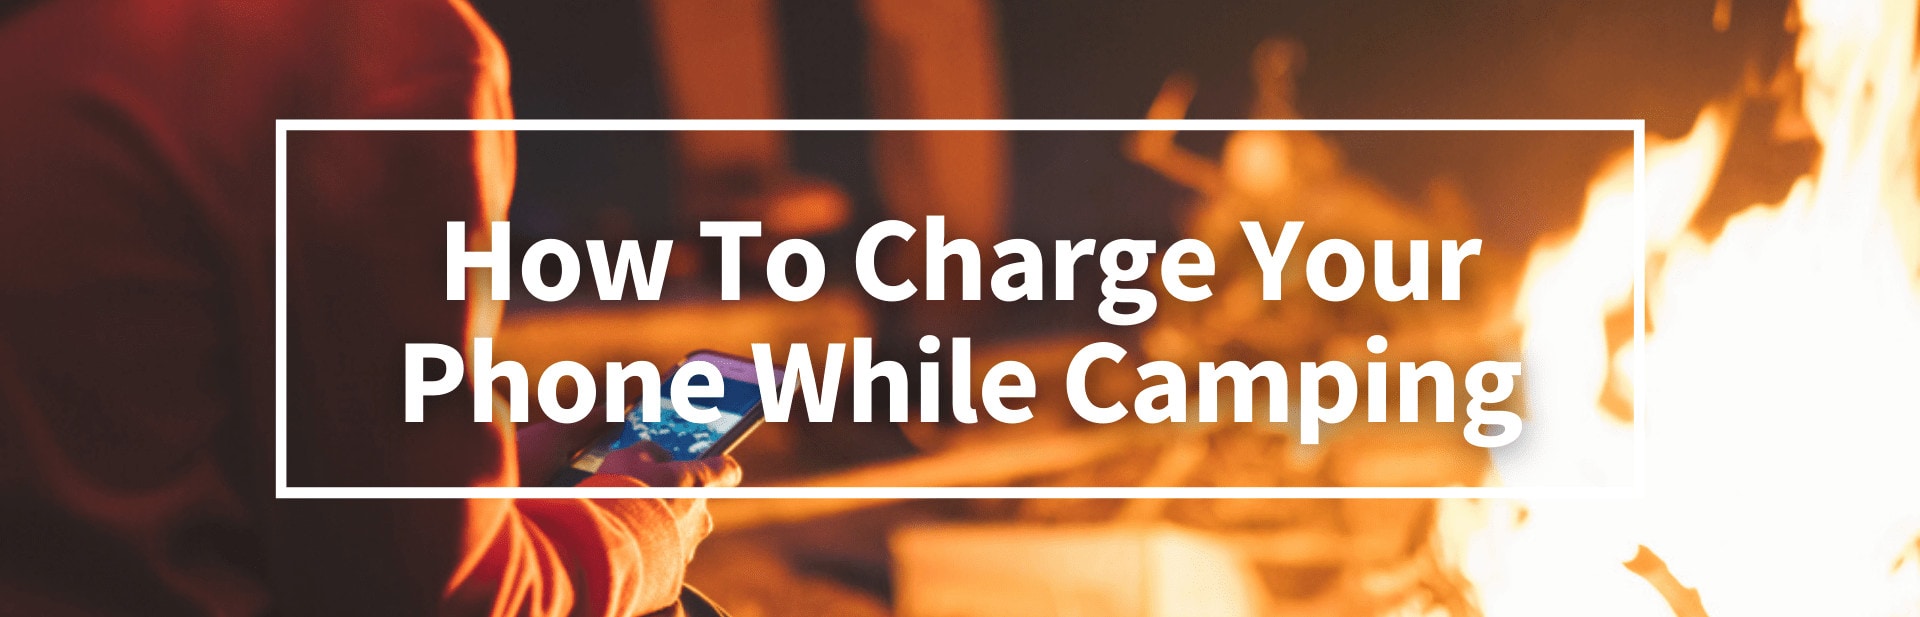 How To Charge Your Phone While Camping